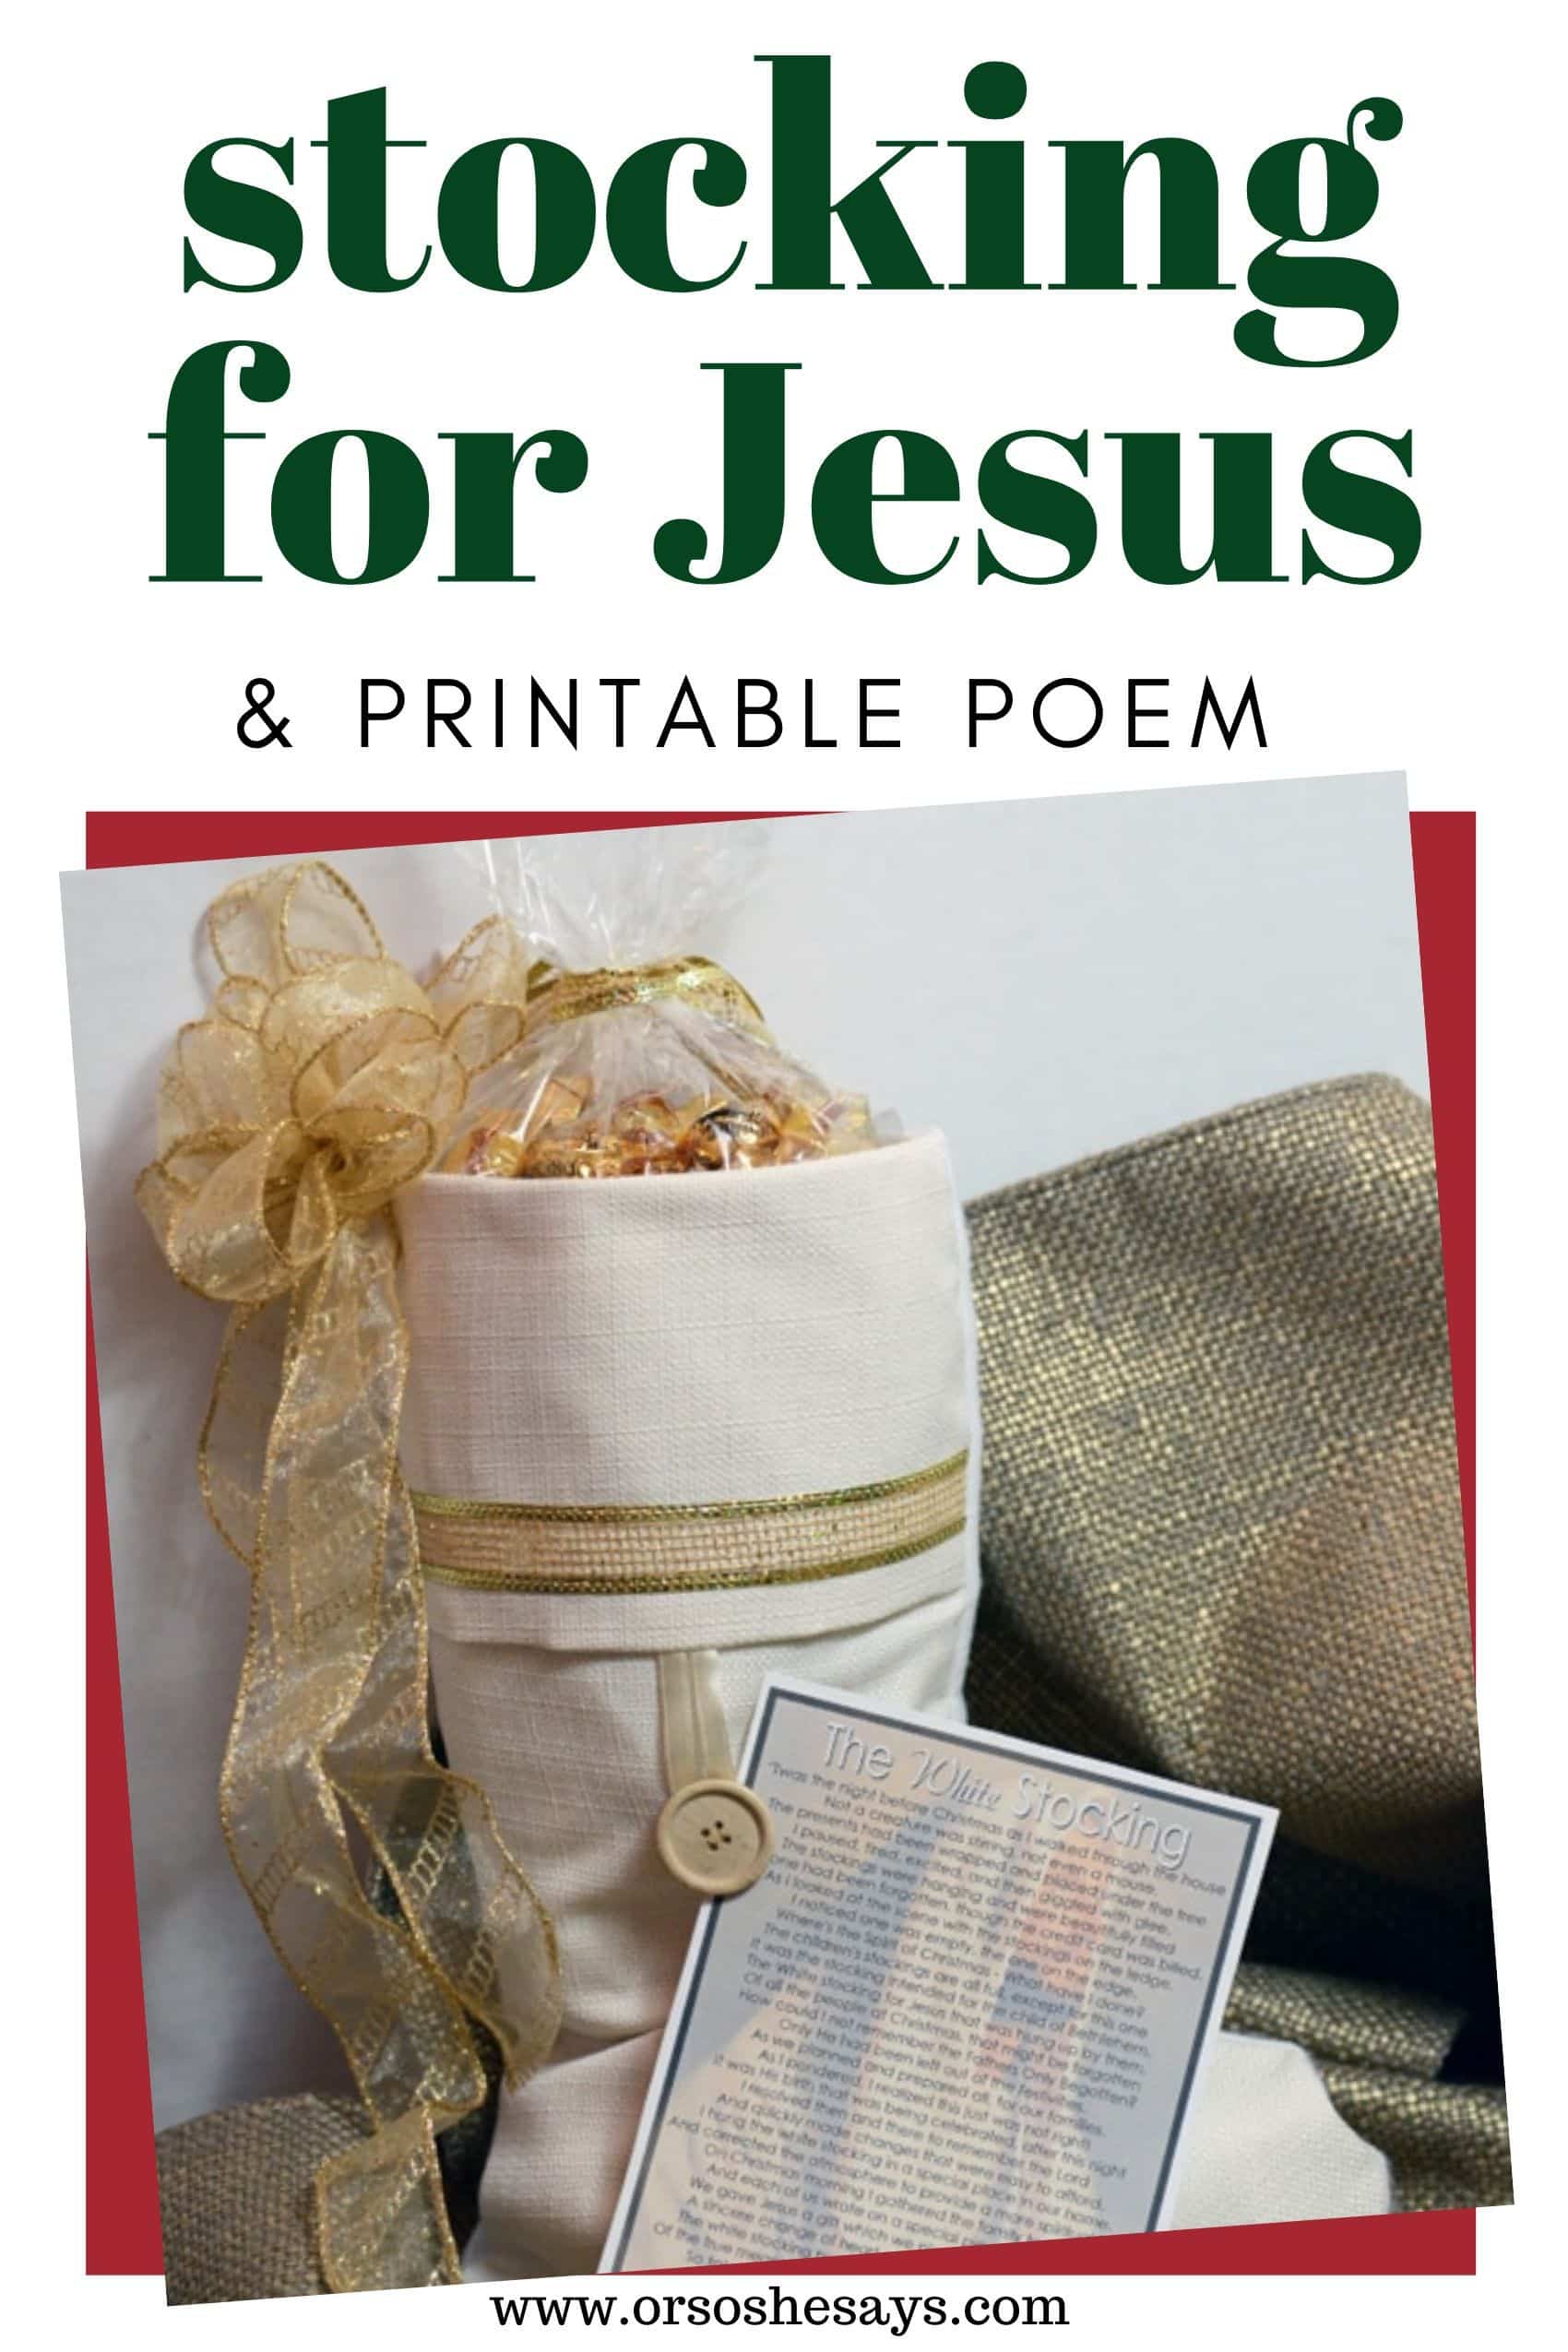 Stocking for Jesus Christmas Tradition ~ Gift Idea for Neighbors